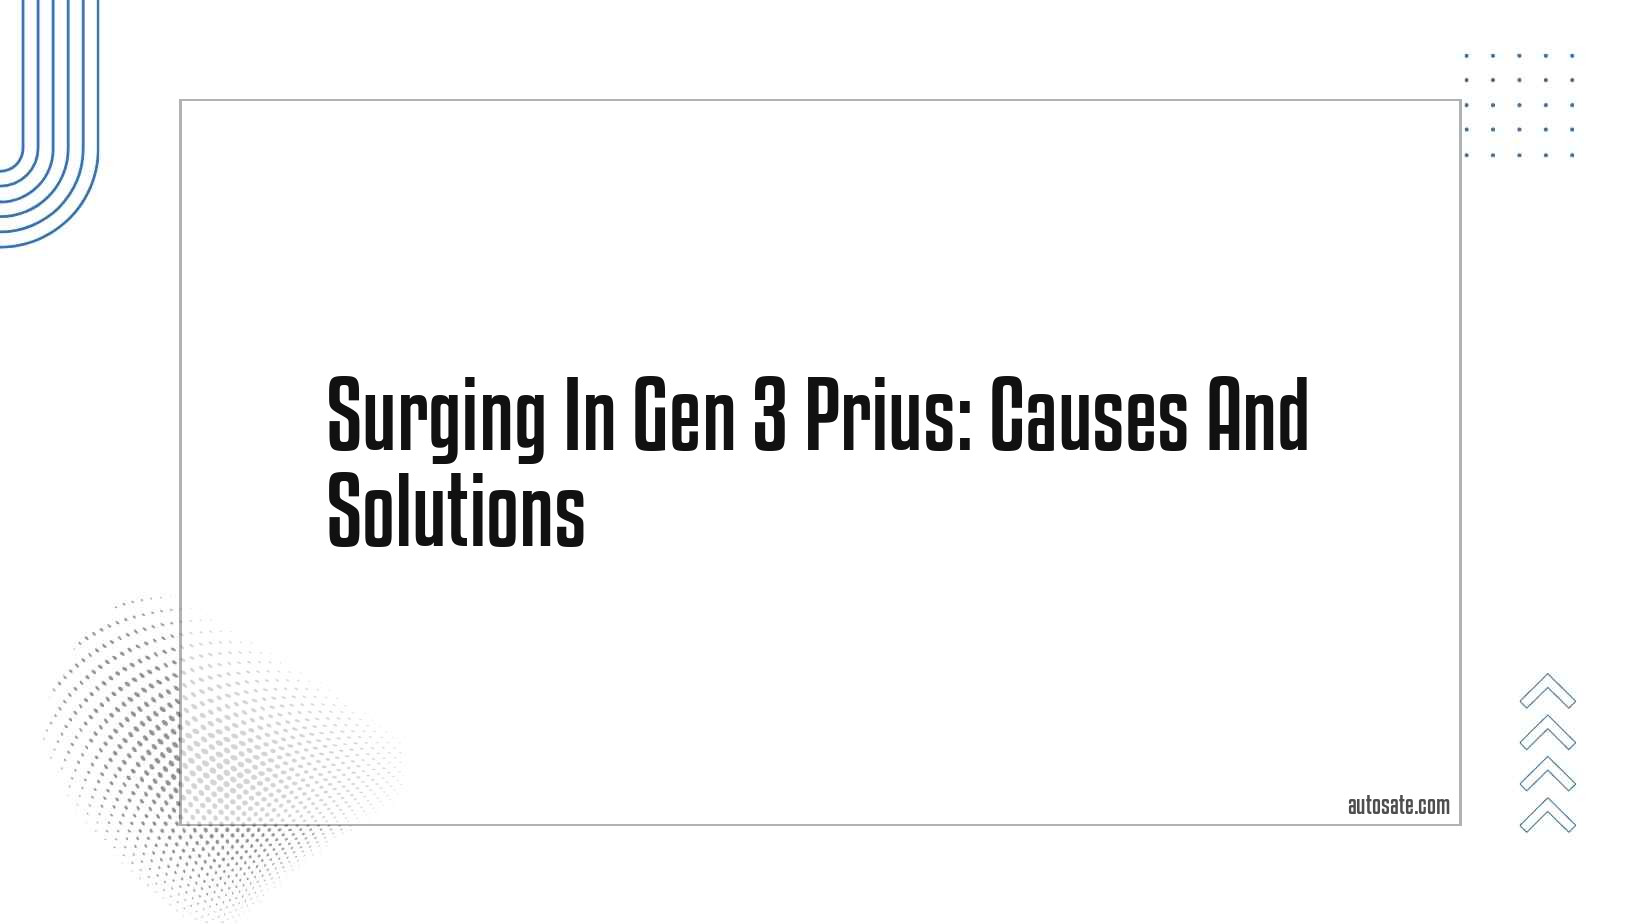 Surging In Gen 3 Prius: Causes And Solutions